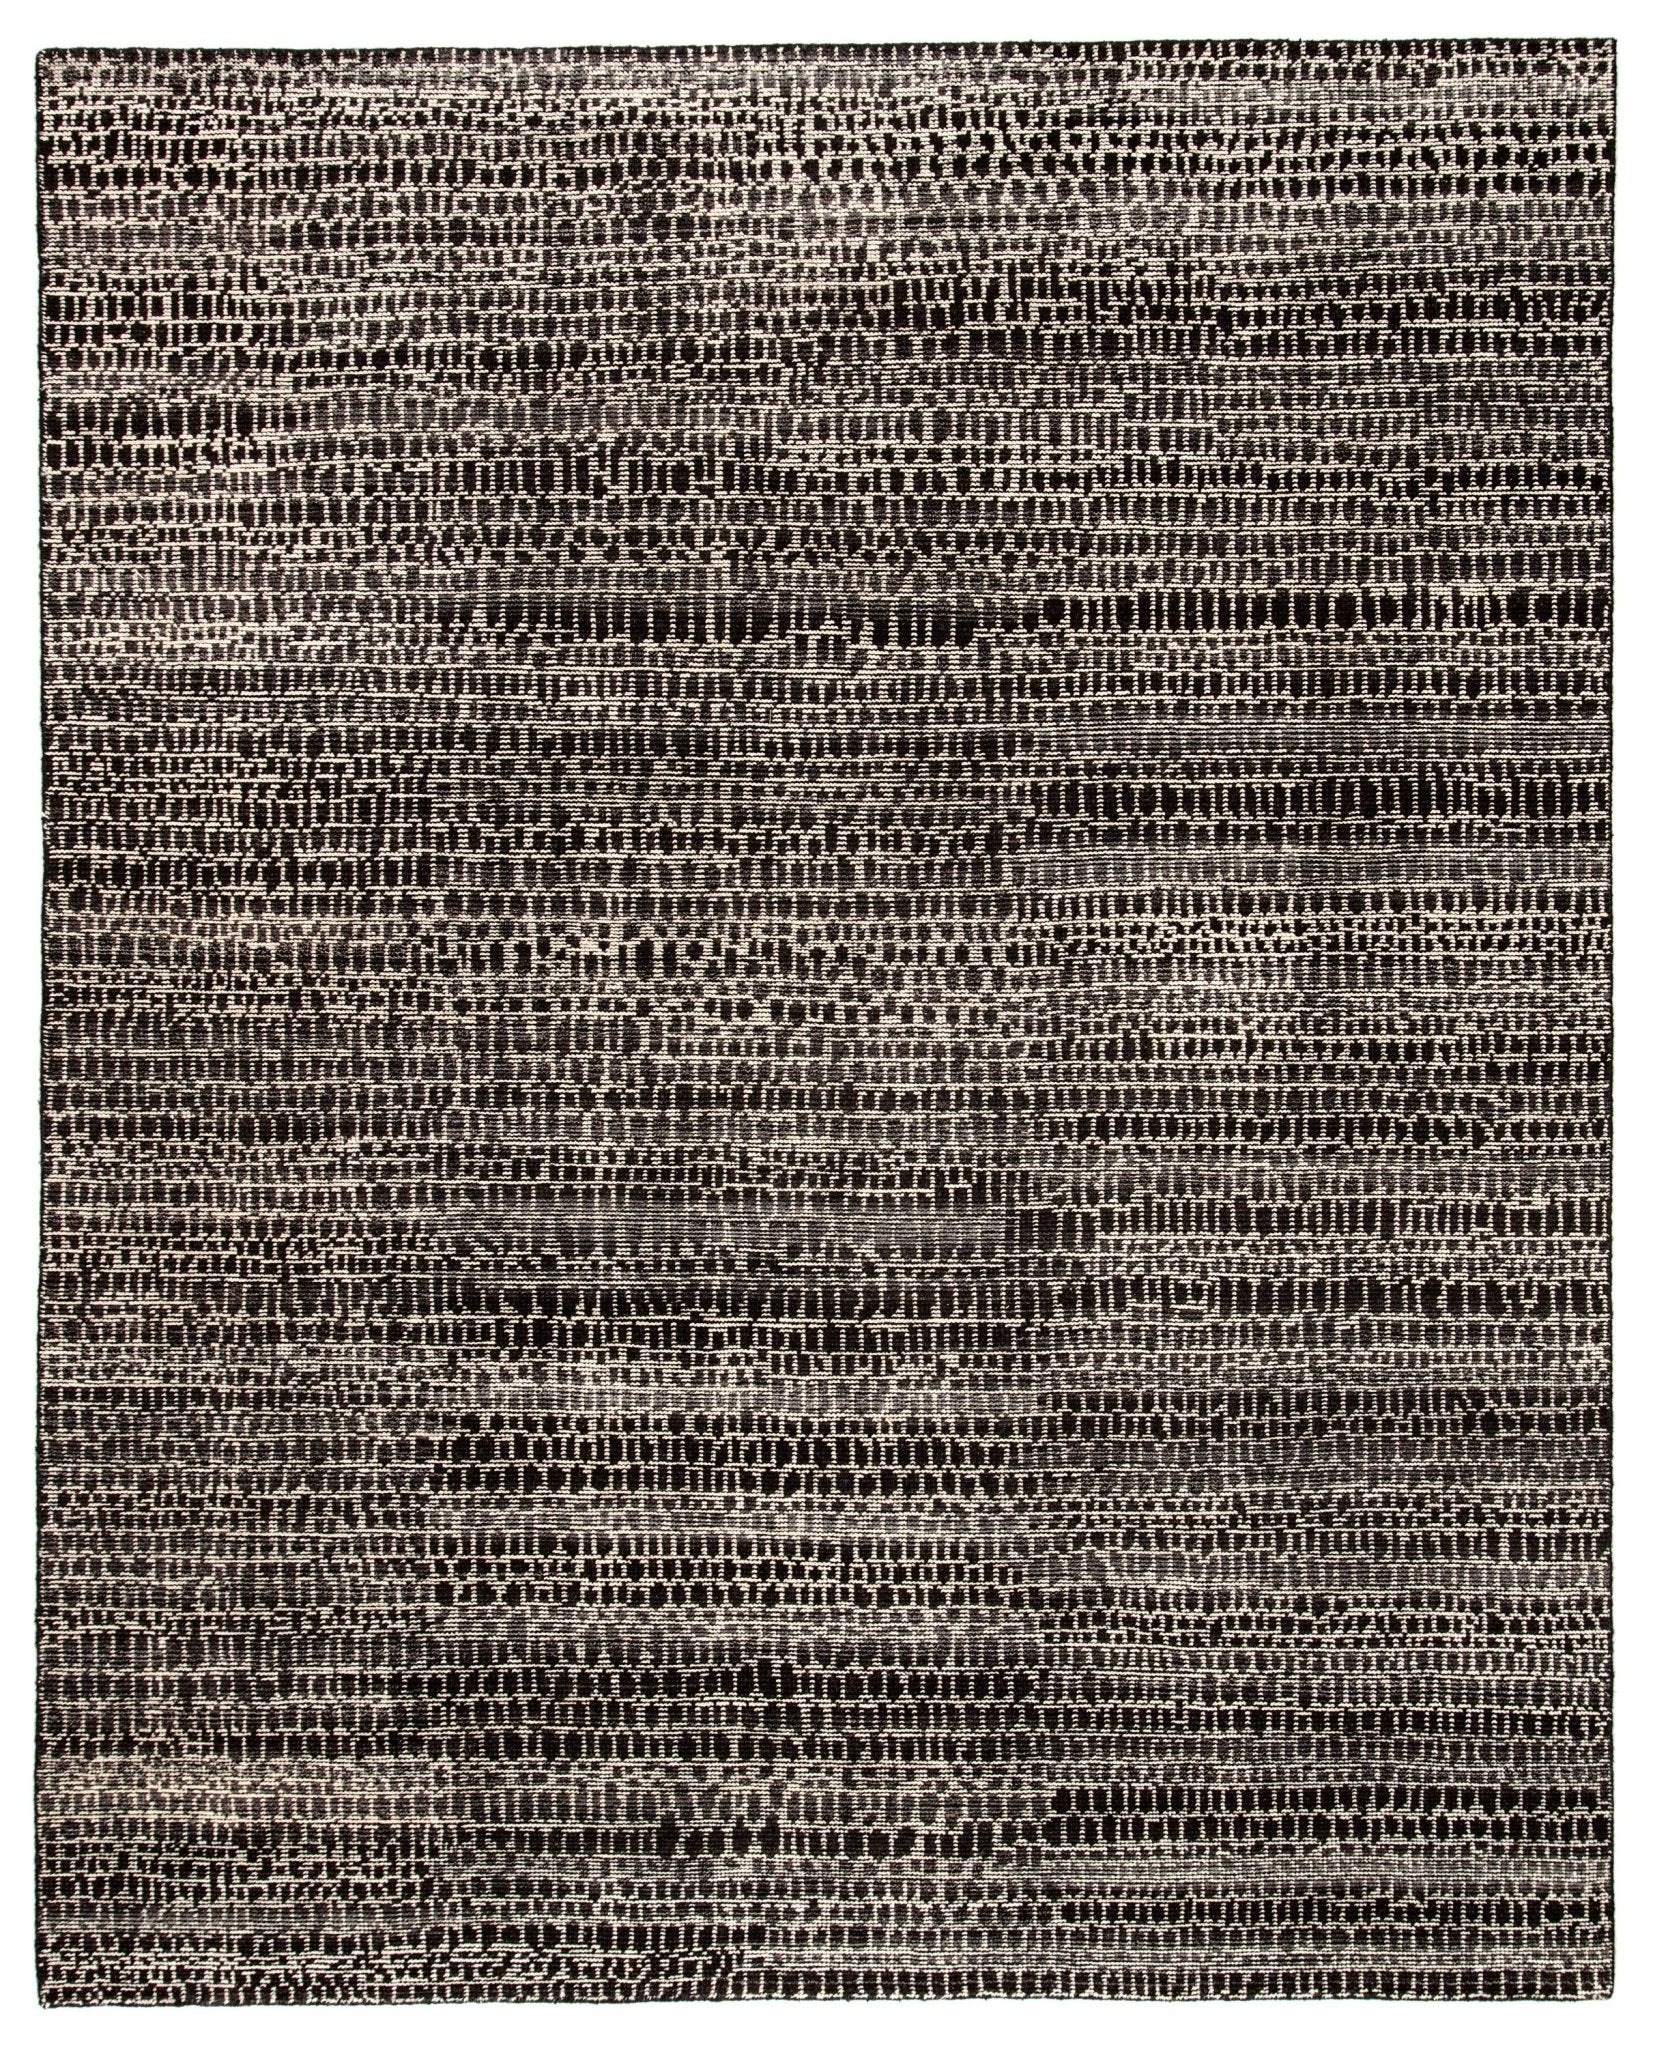 Reverb By Pollack REP01 Kinetic Licorice/Espresso Rug - Rug & Home